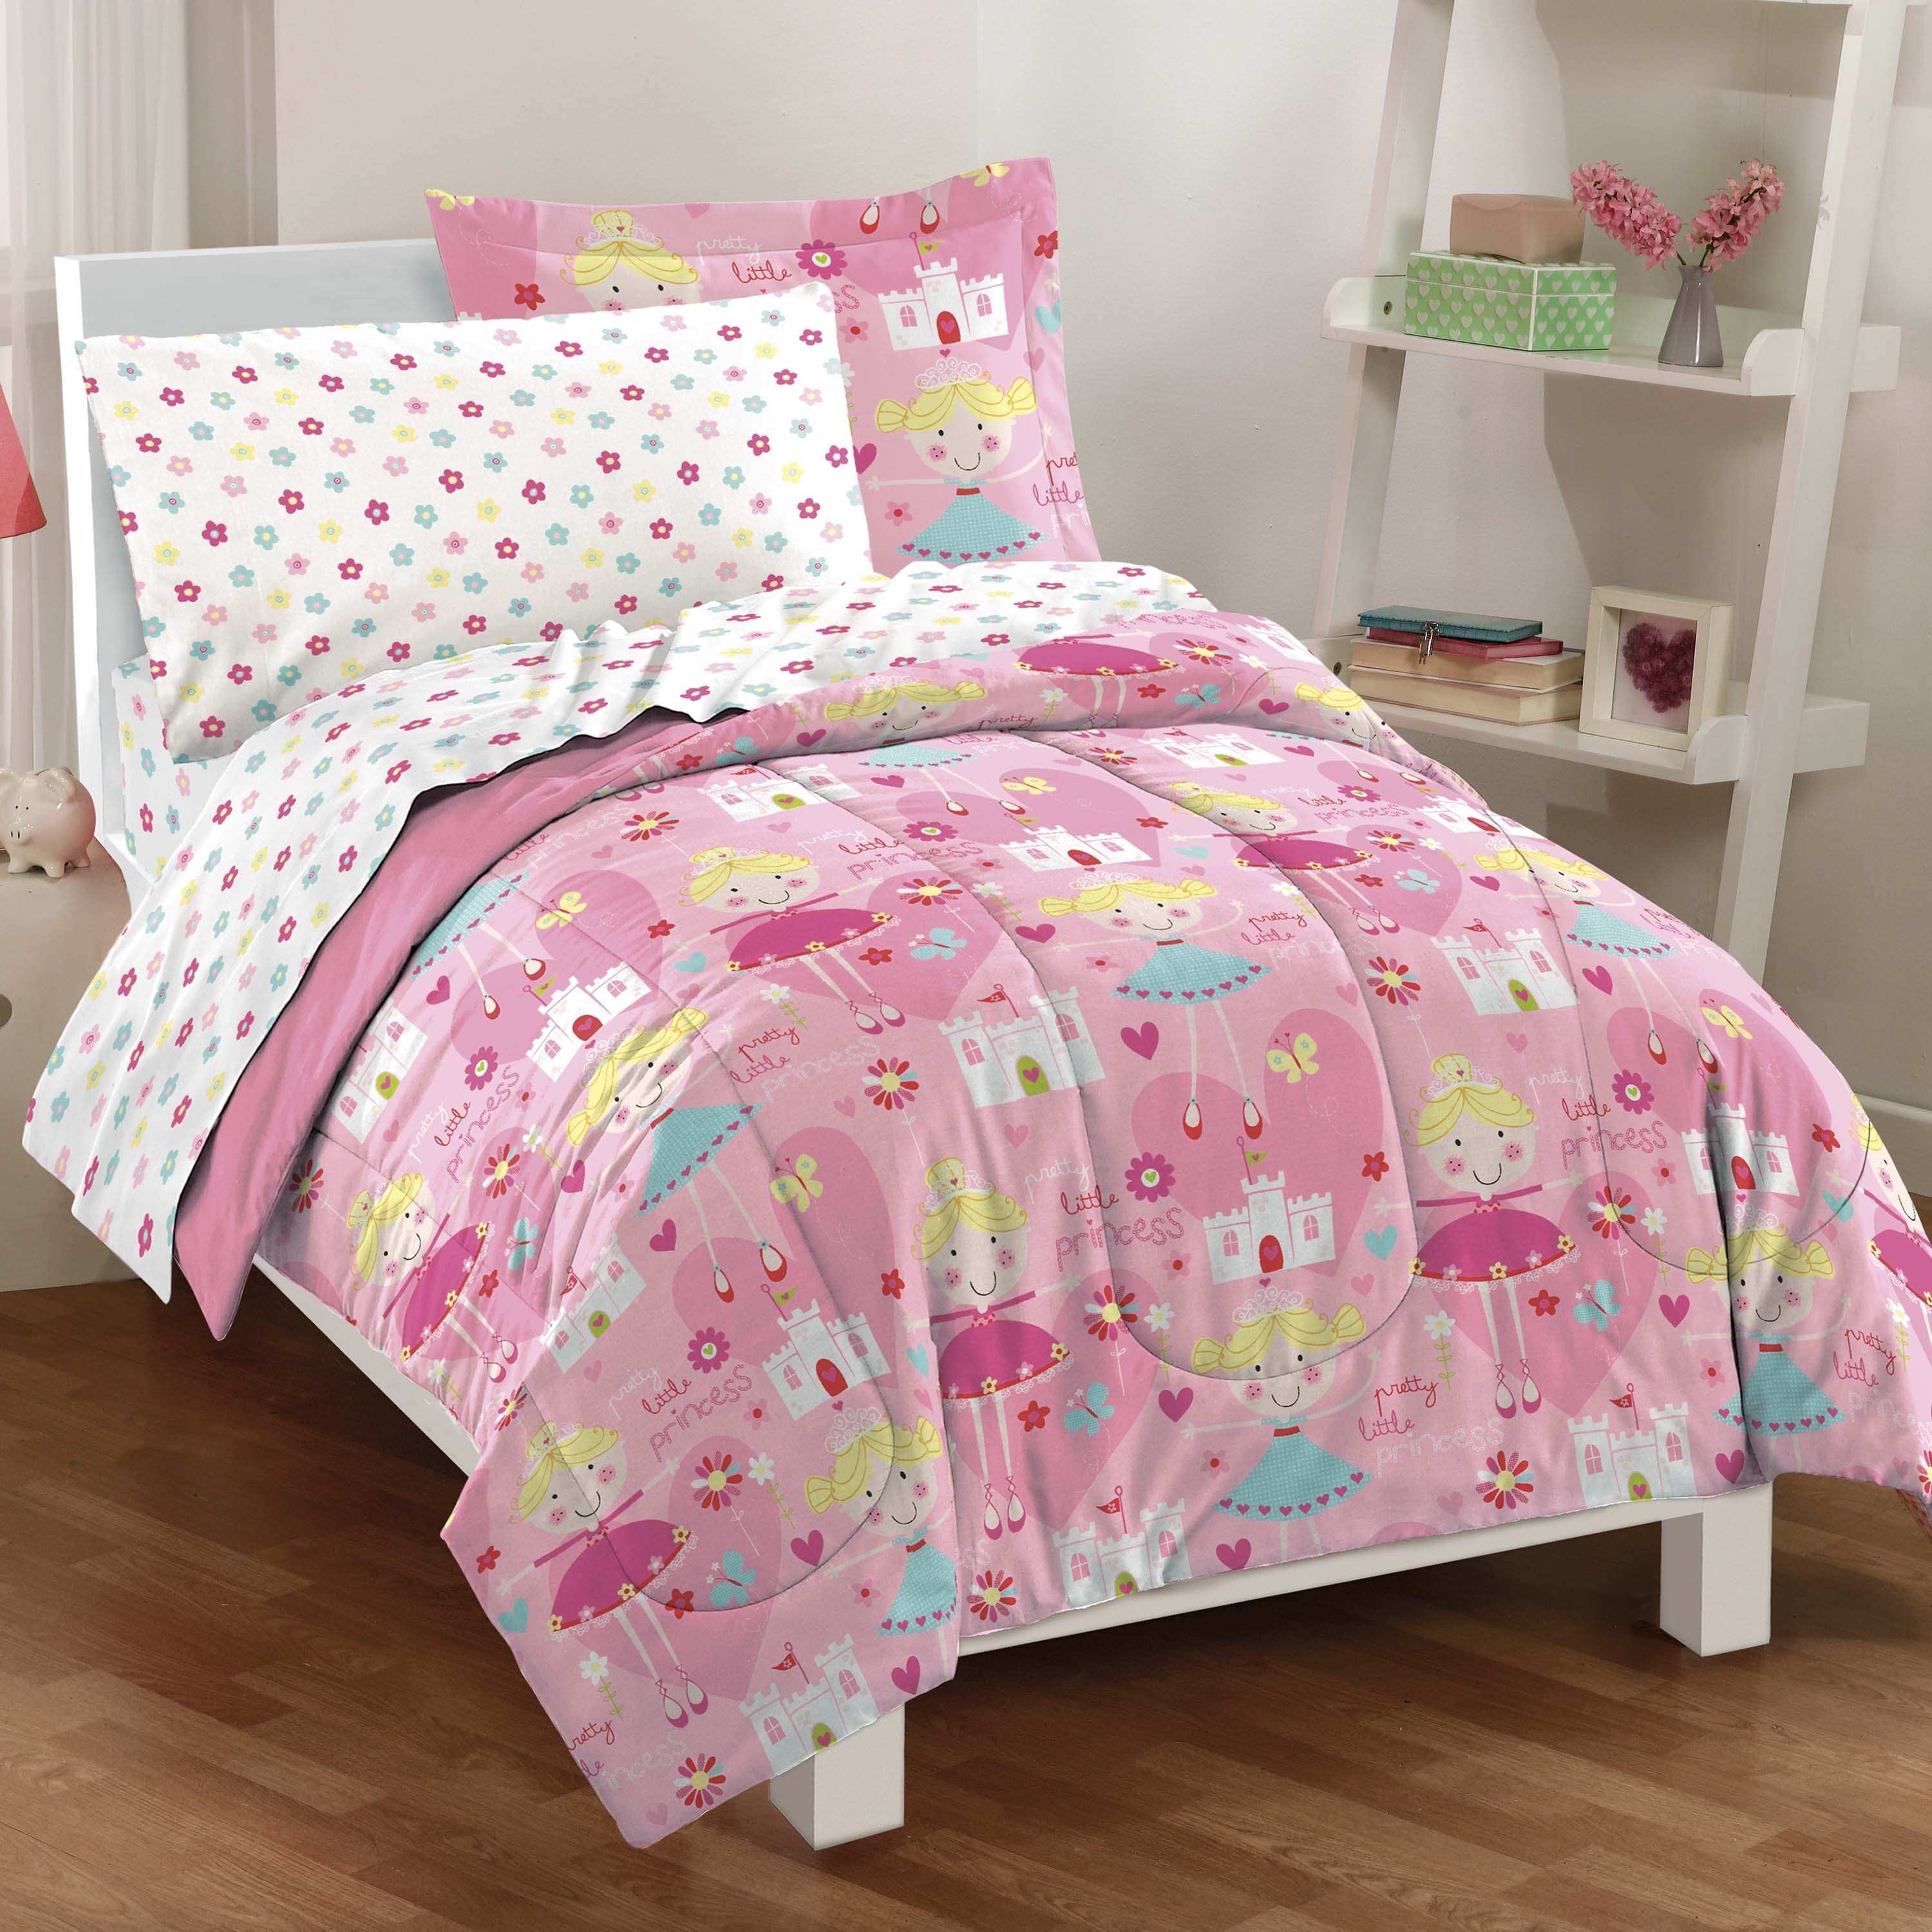 Dream Factory Pretty Princess 7 Piece Bed In A Bag With Sheet Set On Sale Overstock 8625231 Twin 5 Piece